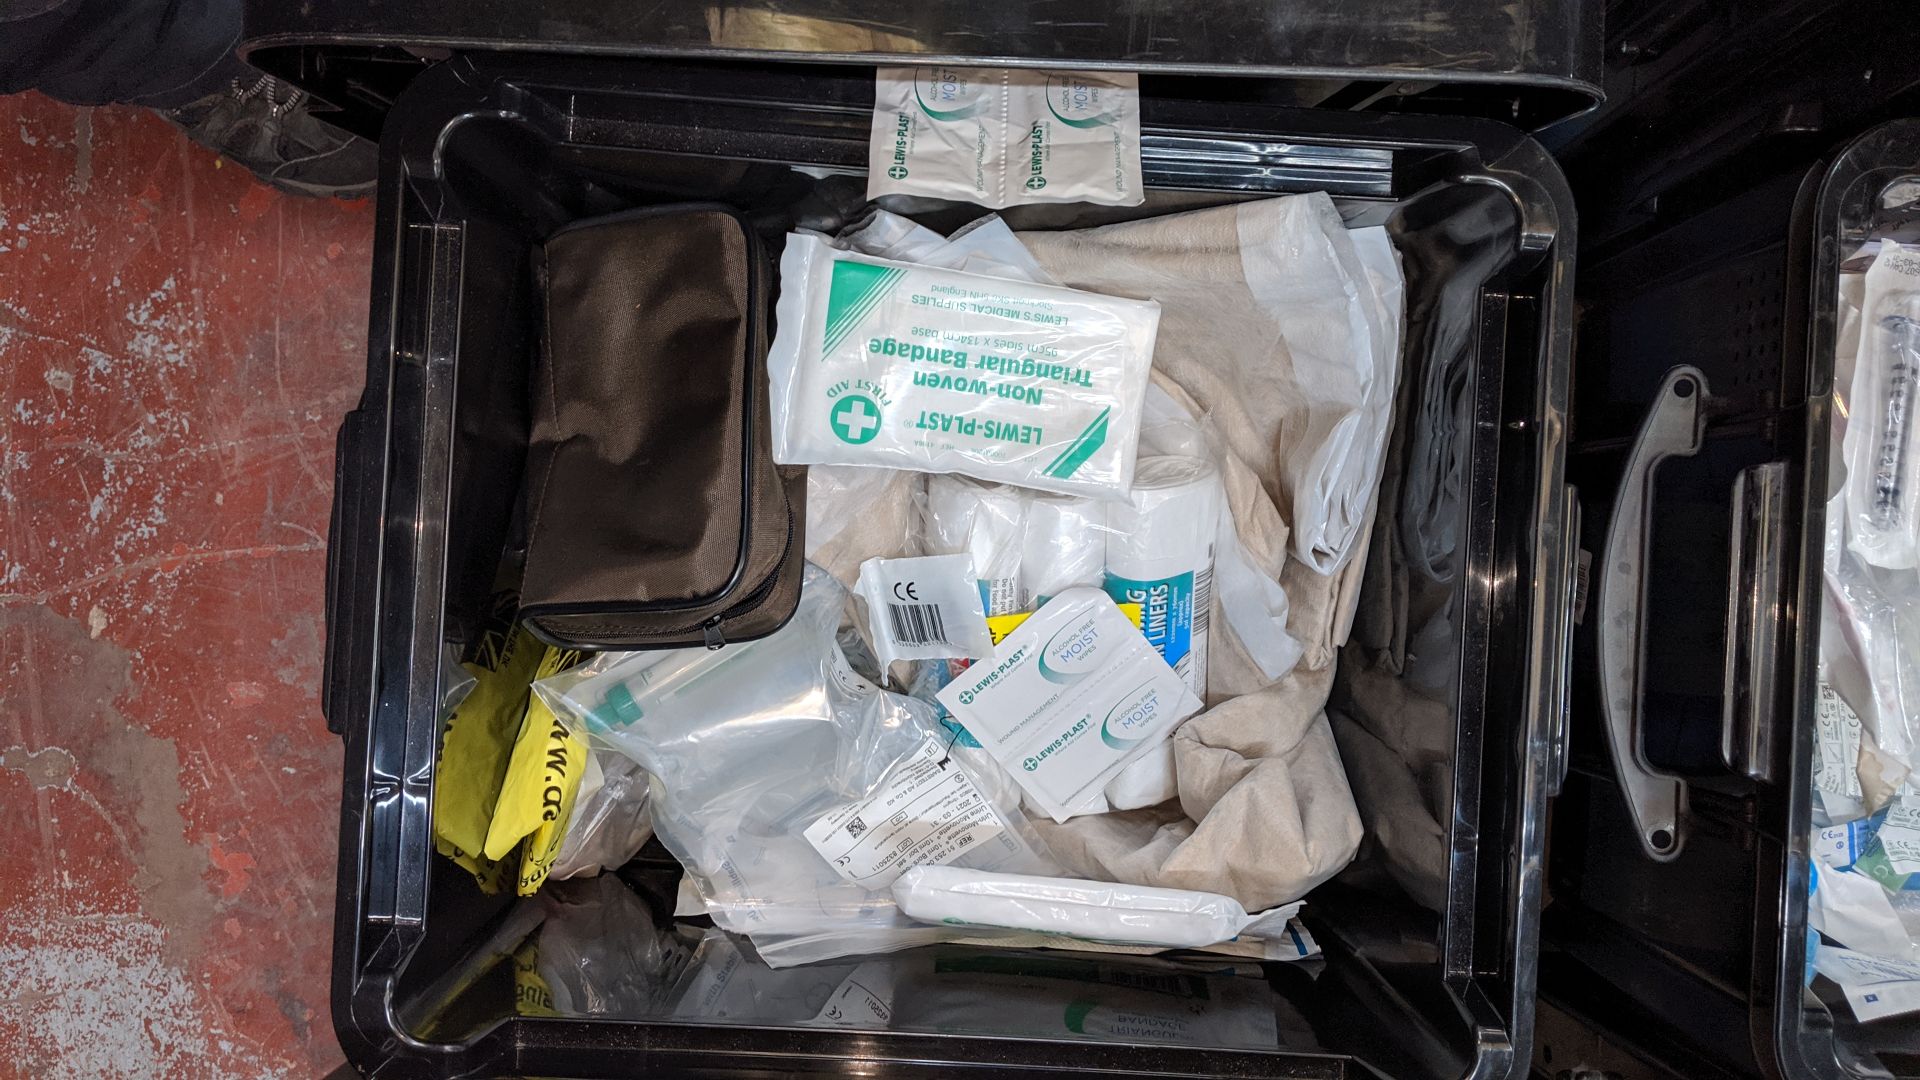 Contents of 6 crates of assorted medical supplies including blood pressure monitoring equipment, - Image 5 of 8